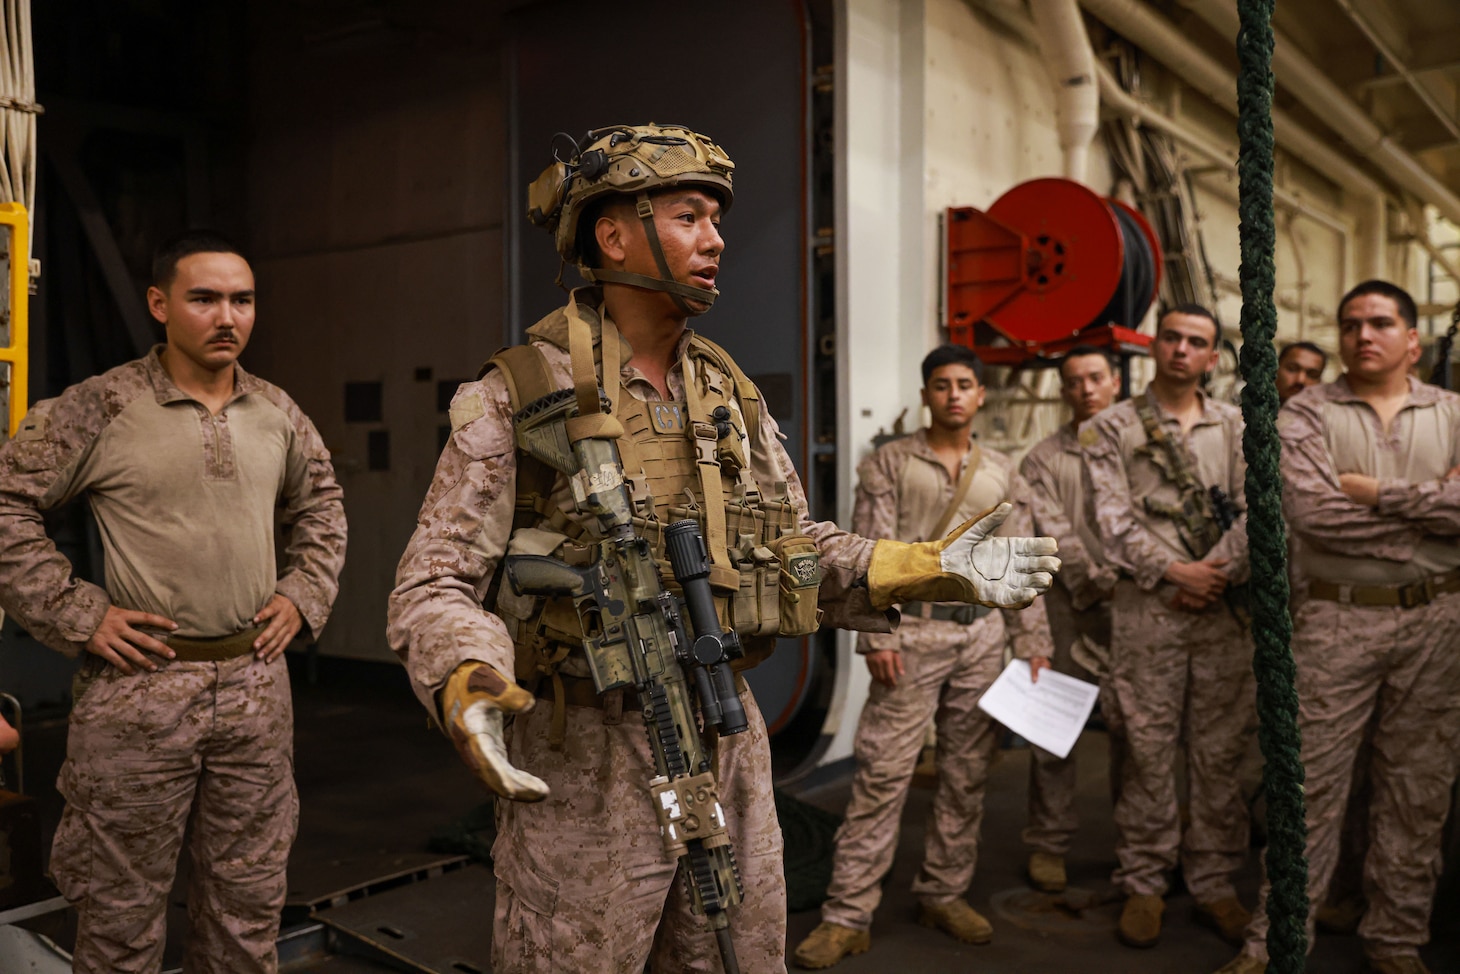 U.S. Marine Corps Sgt. Samuel Ricario, a squad leader and fast-rope master assigned to Charlie Company, Battalion Landing Team 1/5, 15th Marine Expeditionary Unit, briefs dismounting procedures prior to fast-rope training aboard the amphibious transport dock USS Somerset (LPD 25) during Exercise Tiger TRIUMPH in Visakhapatnam, India, March 20, 2024. Tiger TRIUMPH is a U.S.-India tri-service amphibious exercise focused on humanitarian assistance and disaster relief readiness and interoperability. Tiger TRIUMPH enables U.S. and Indian Armed Forces to improve interoperability and bilateral, joint, and service readiness in the Indian Ocean region and beyond to better achieve mutual regional security objectives. (U.S. Marine Corps photo by Cpl. Aidan Hekker)